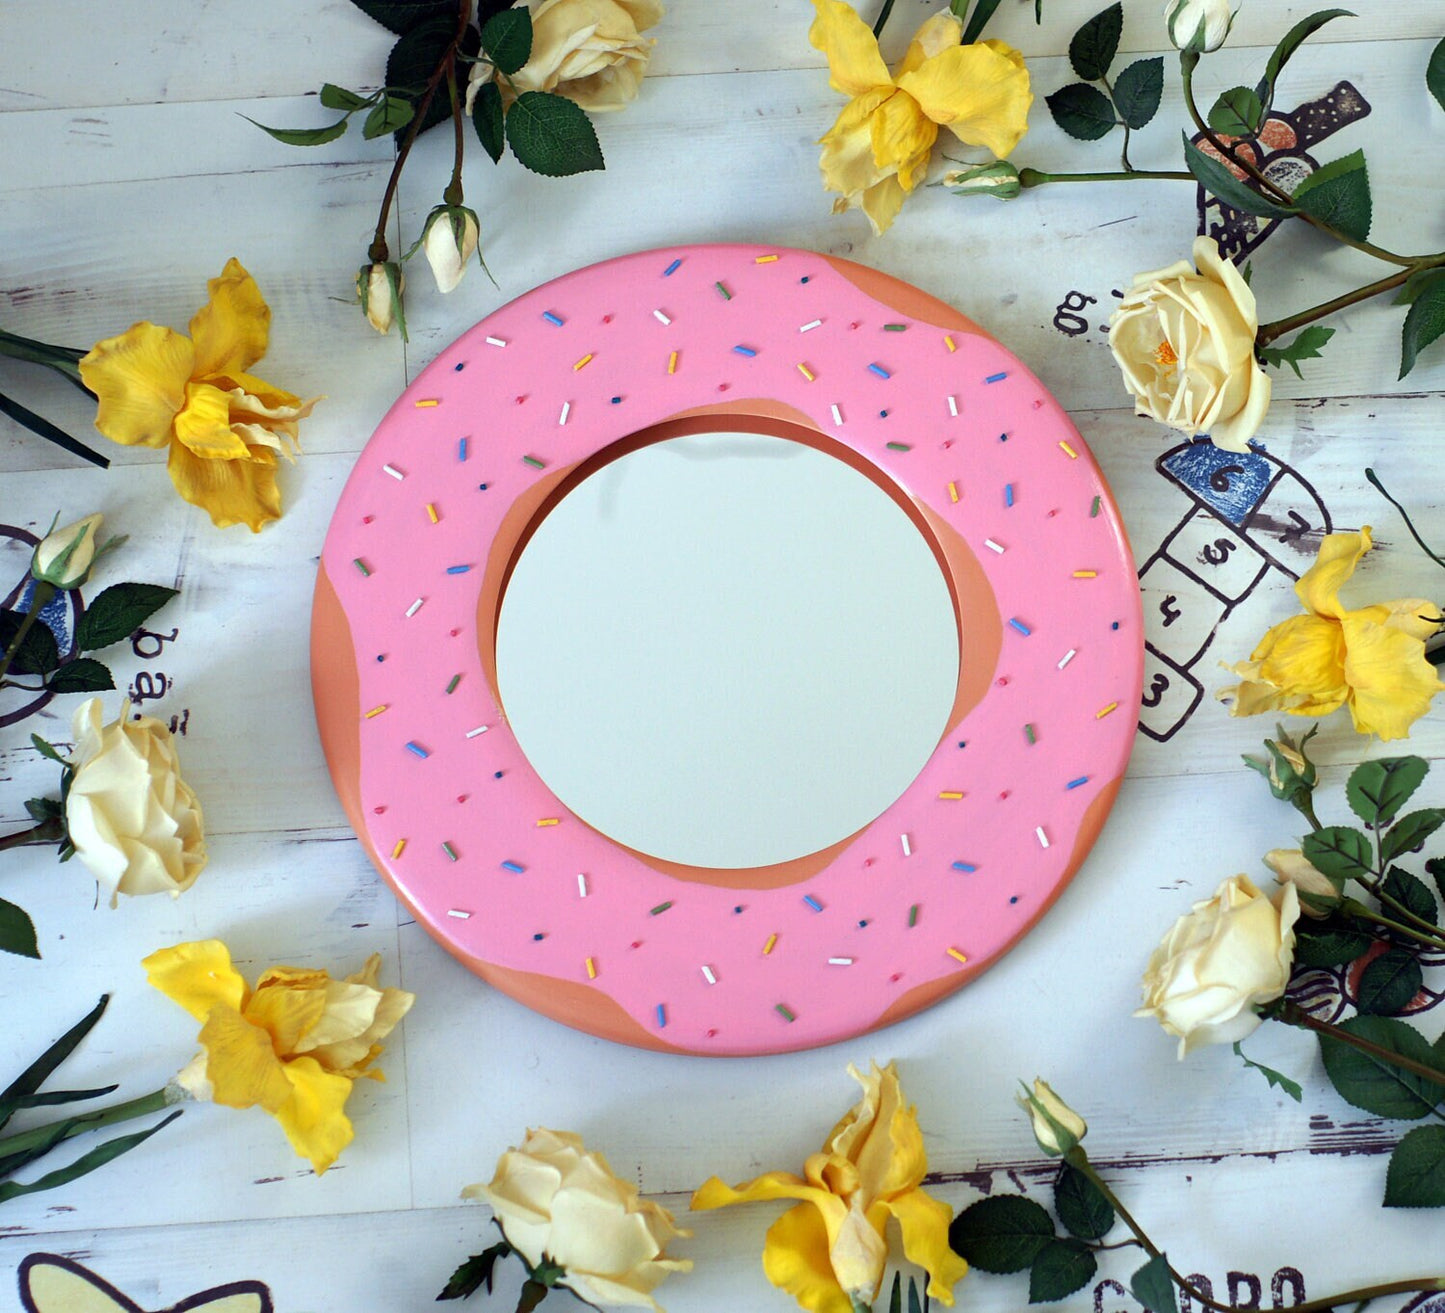 Childrens mirror for wall, Wall mirror for kids room, Unique candy mirror, Donuts frame mirror for kids room, Sweety mirror for baby